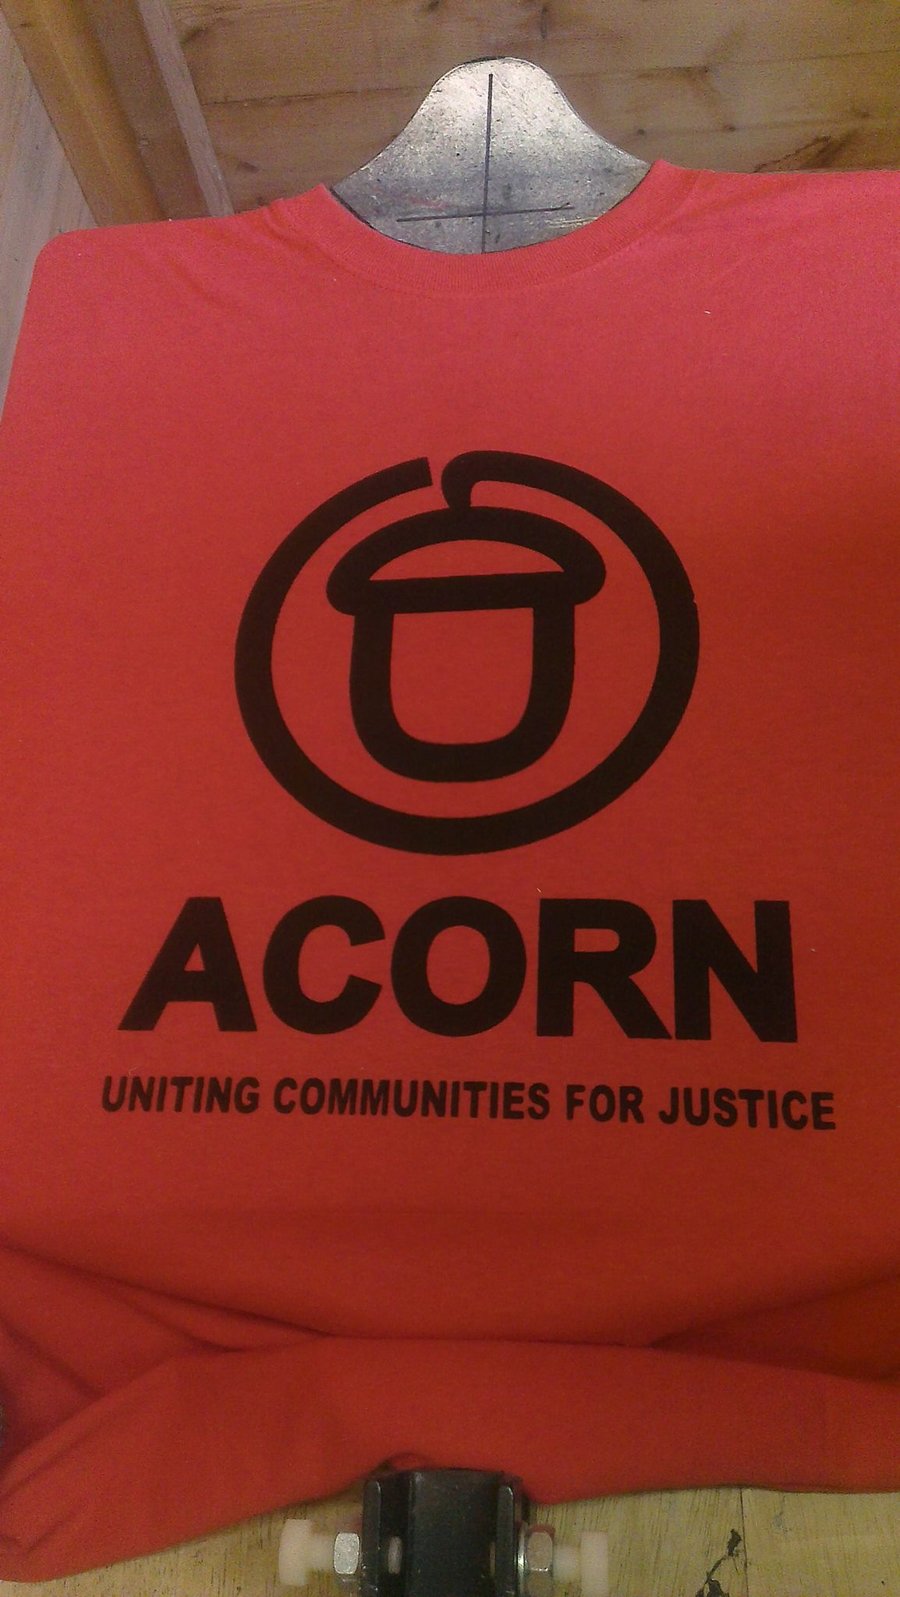 Image of "Uniting Communities for Justice" T-shirt